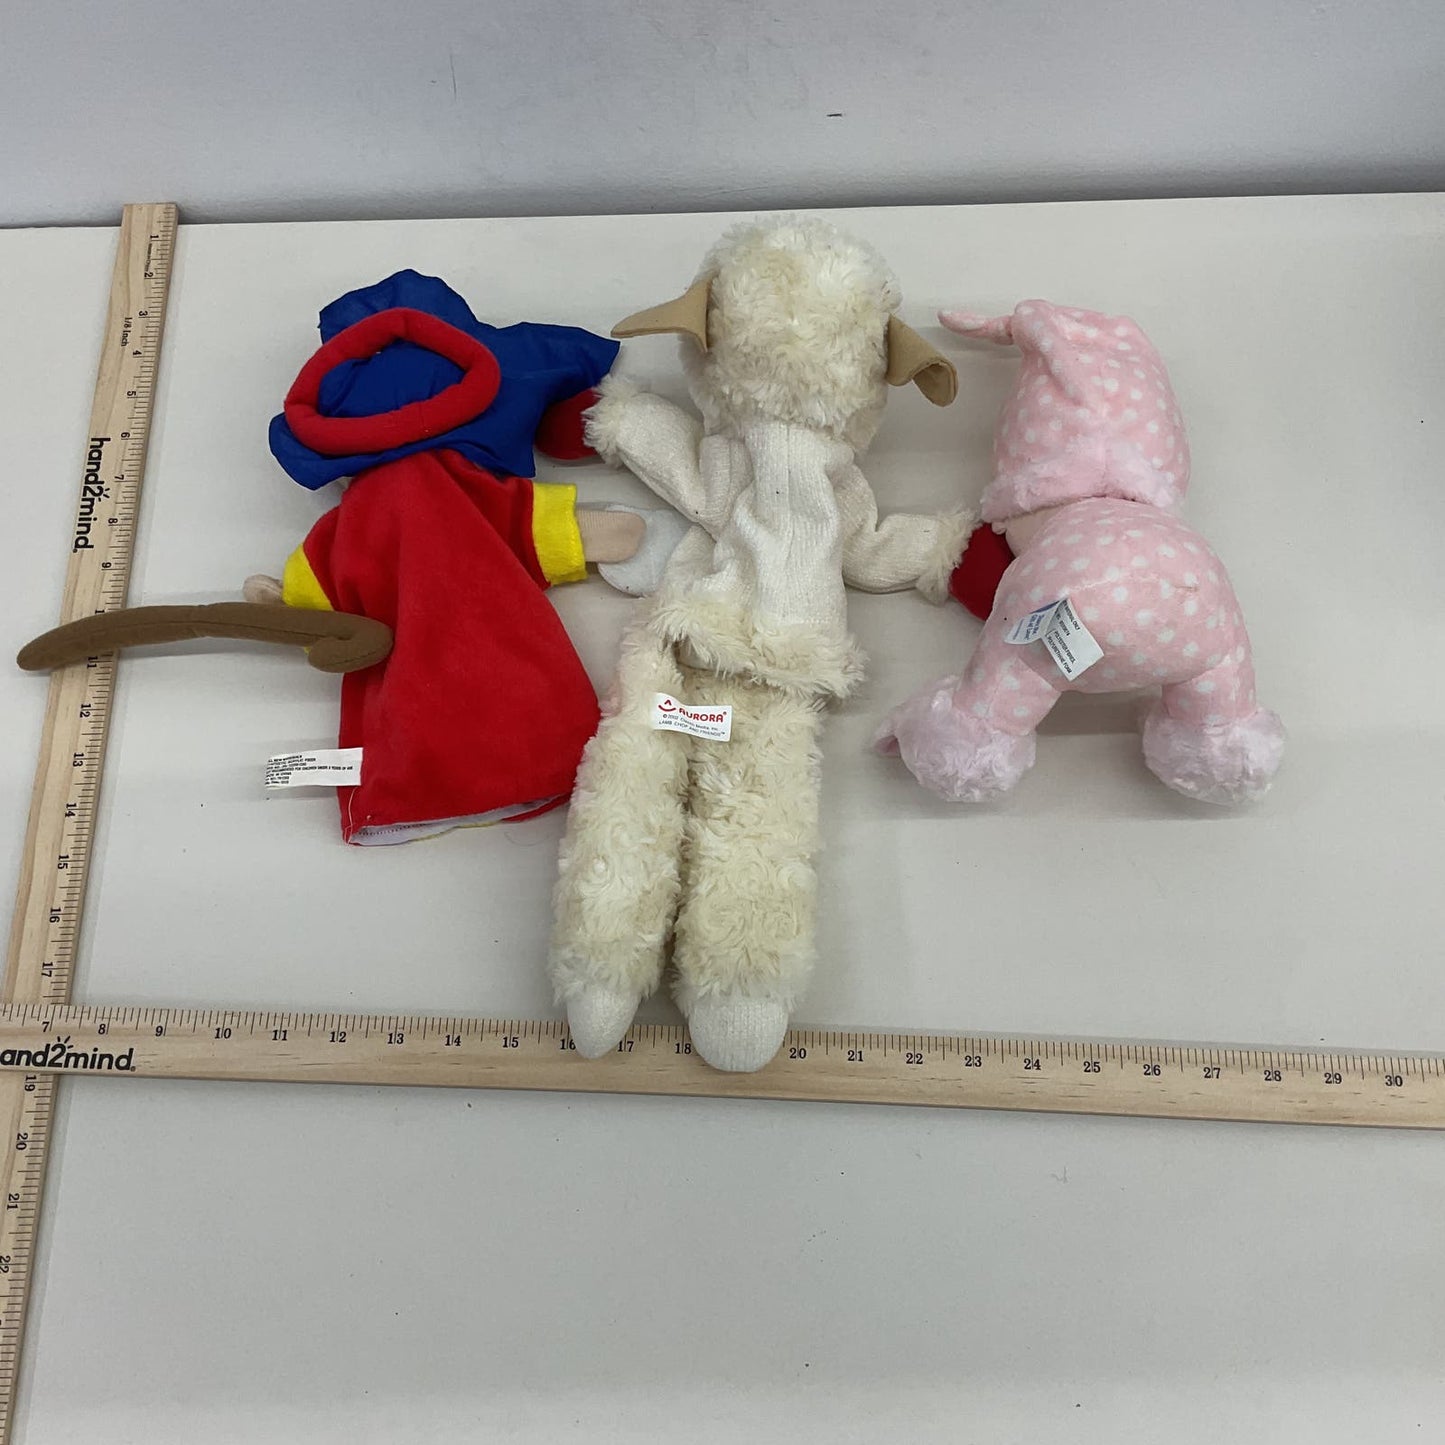 Mixed LOT Precious Moments Little Girl Lamb Chop Wise Man Hand Puppets Plush Toys - Warehouse Toys